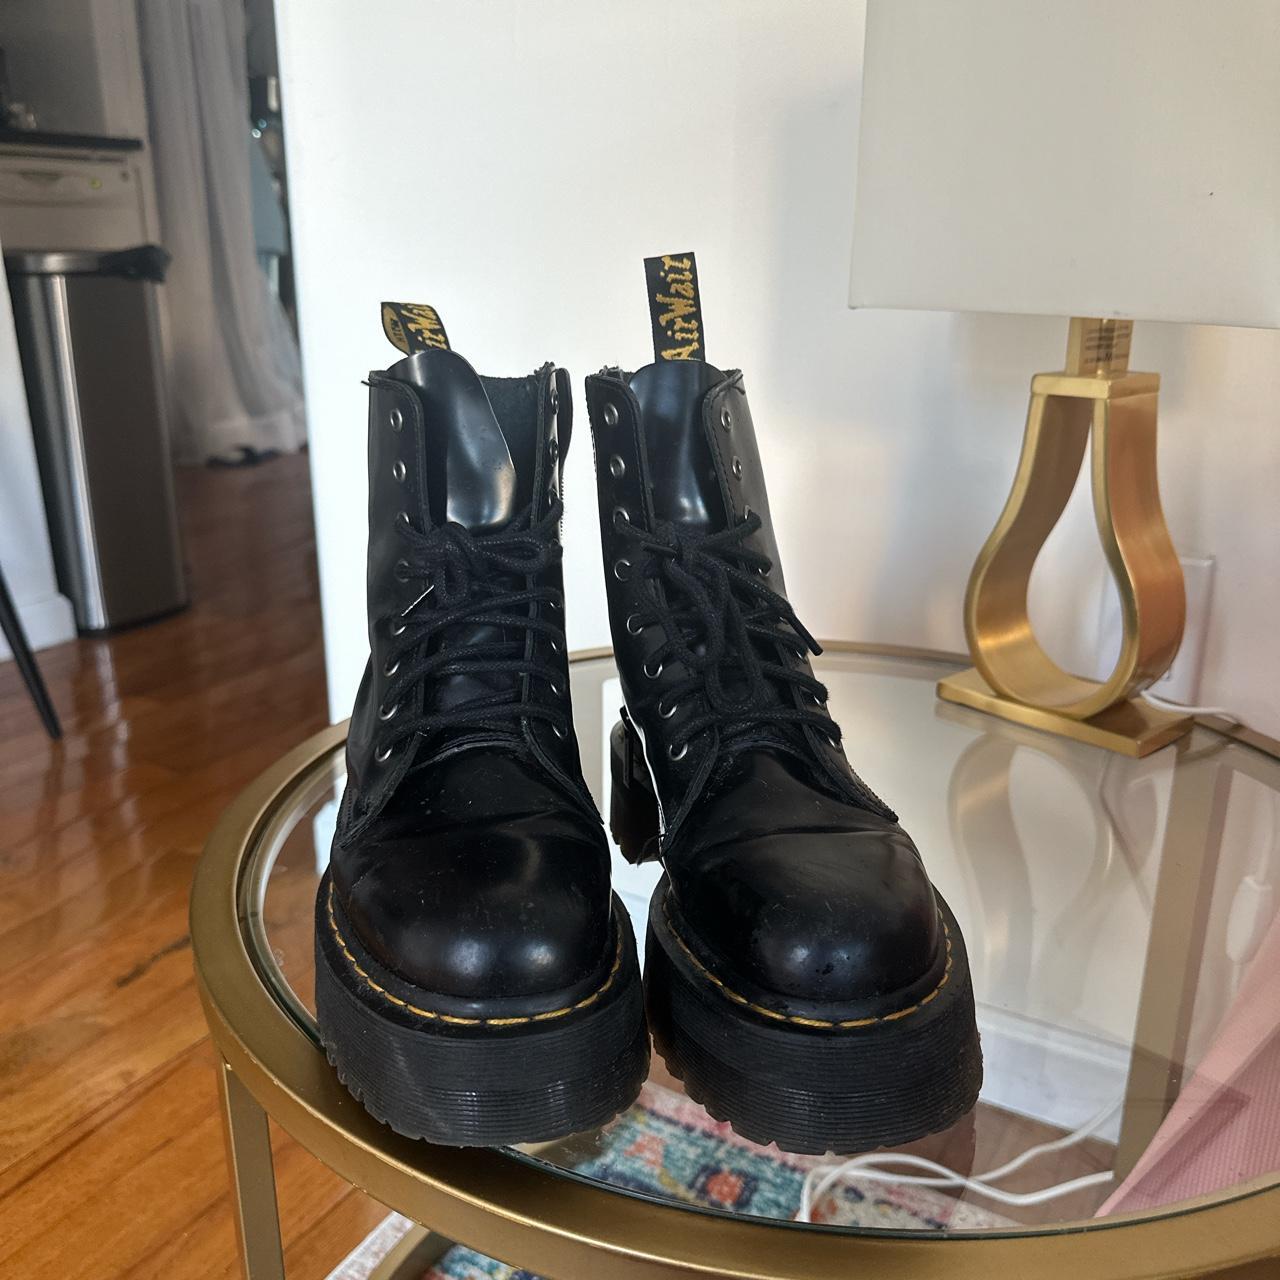 Selling Platform Doc Martens size 8.5. They are... - Depop